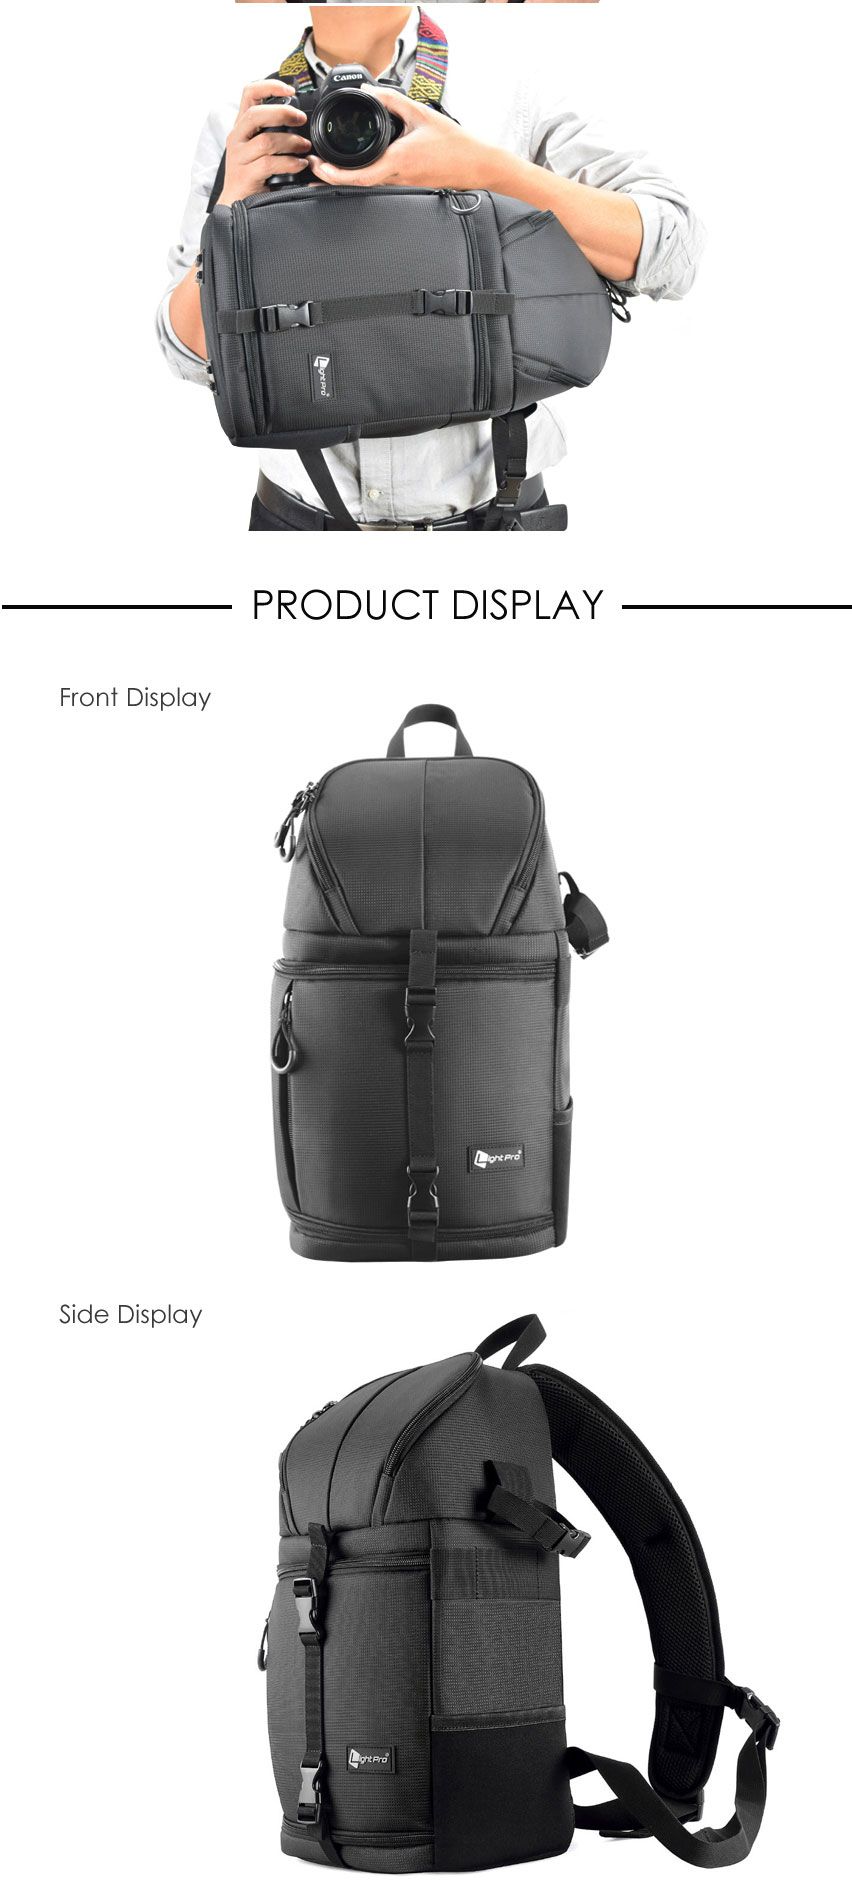 Light-Pro-Sling-Bag-Shoulder-Cross-Waterproof-Water-resistant-with-Rain-Cover-for-Canon-for-Nikon-fo-1599078